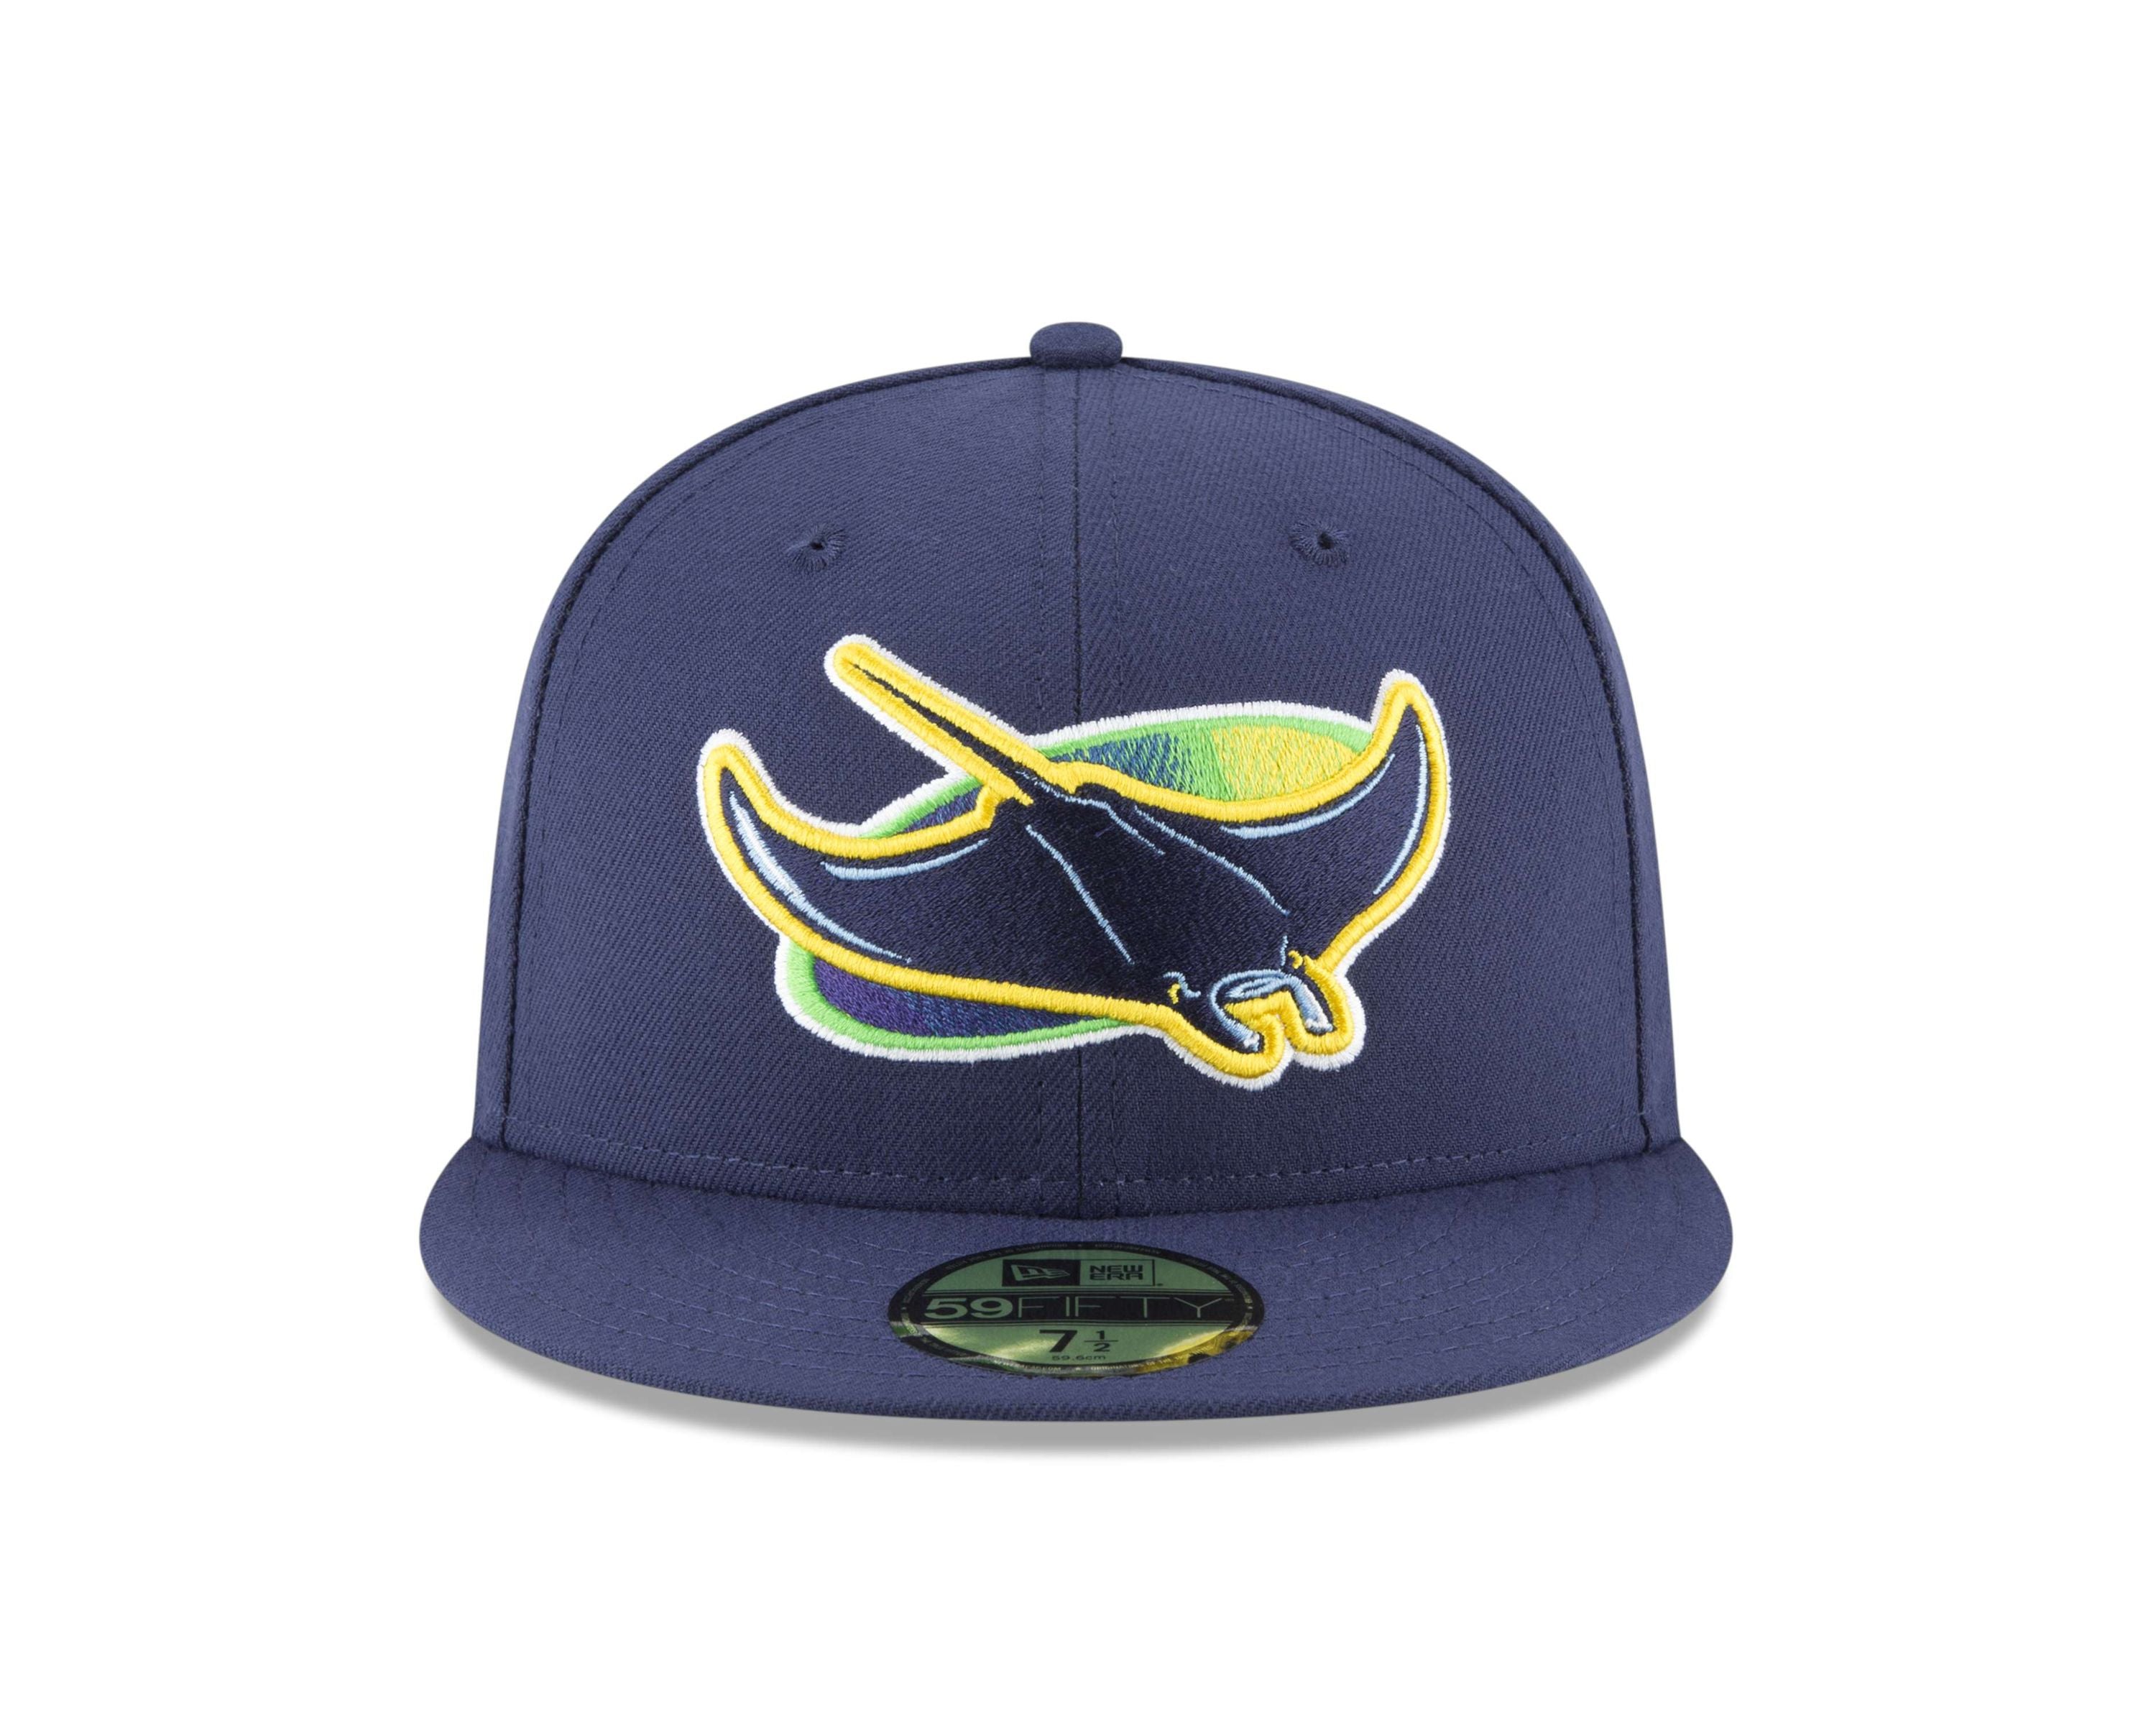 New Era - MLB Tampa Bay Rays Authentic Collection Alternate Fitted Cap -